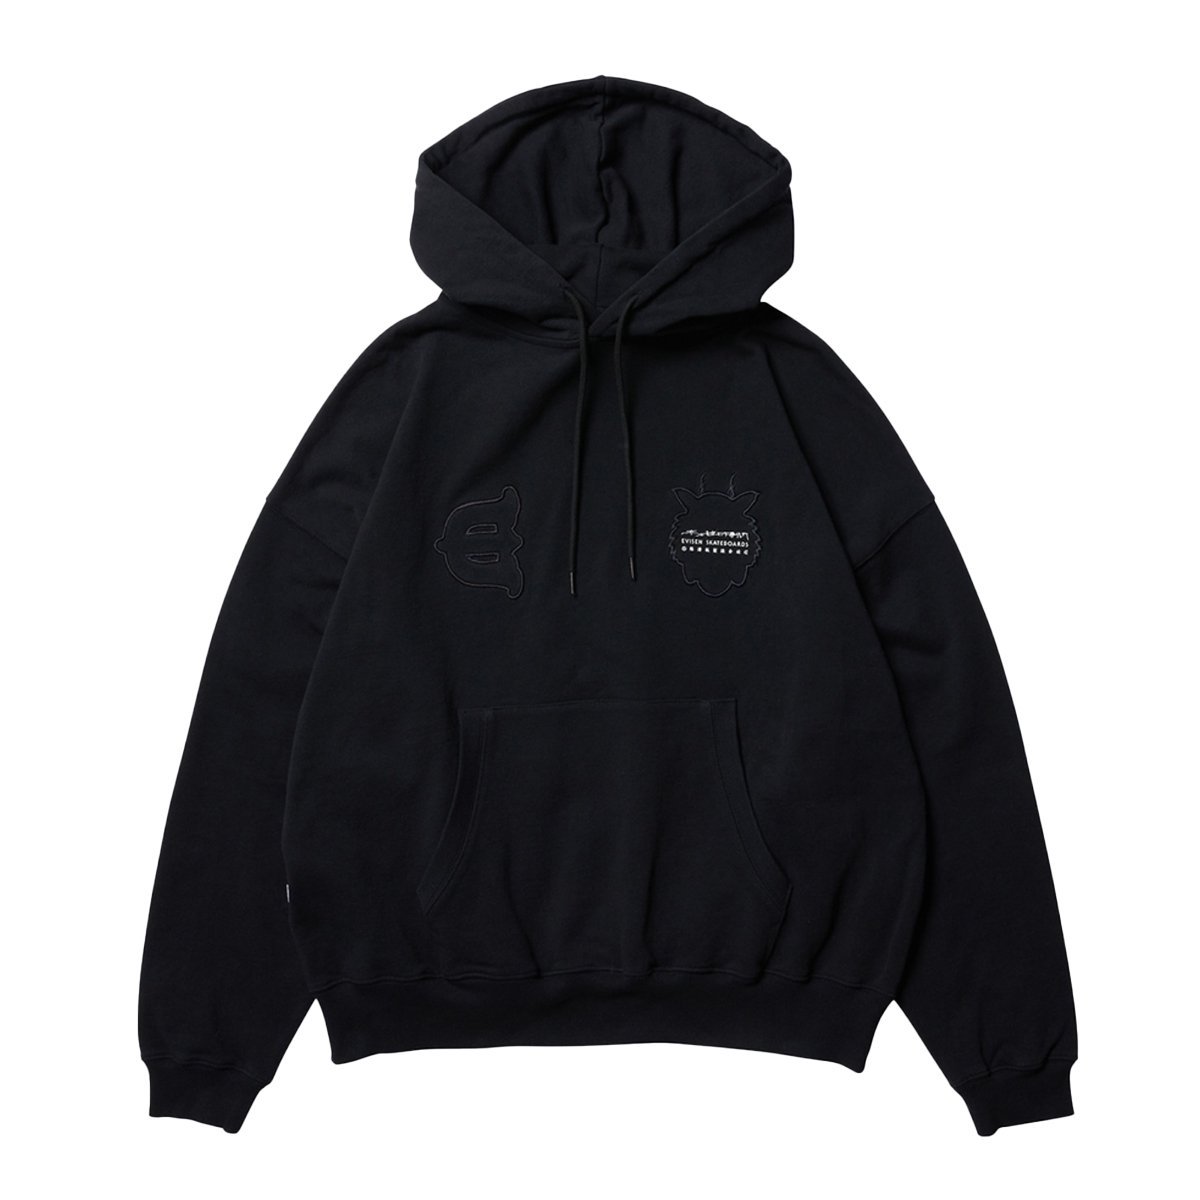 <img class='new_mark_img1' src='https://img.shop-pro.jp/img/new/icons8.gif' style='border:none;display:inline;margin:0px;padding:0px;width:auto;' />EVISENĲ̳Tora Evi Logo Hoodie (Black)
                          </a>
            <span class=